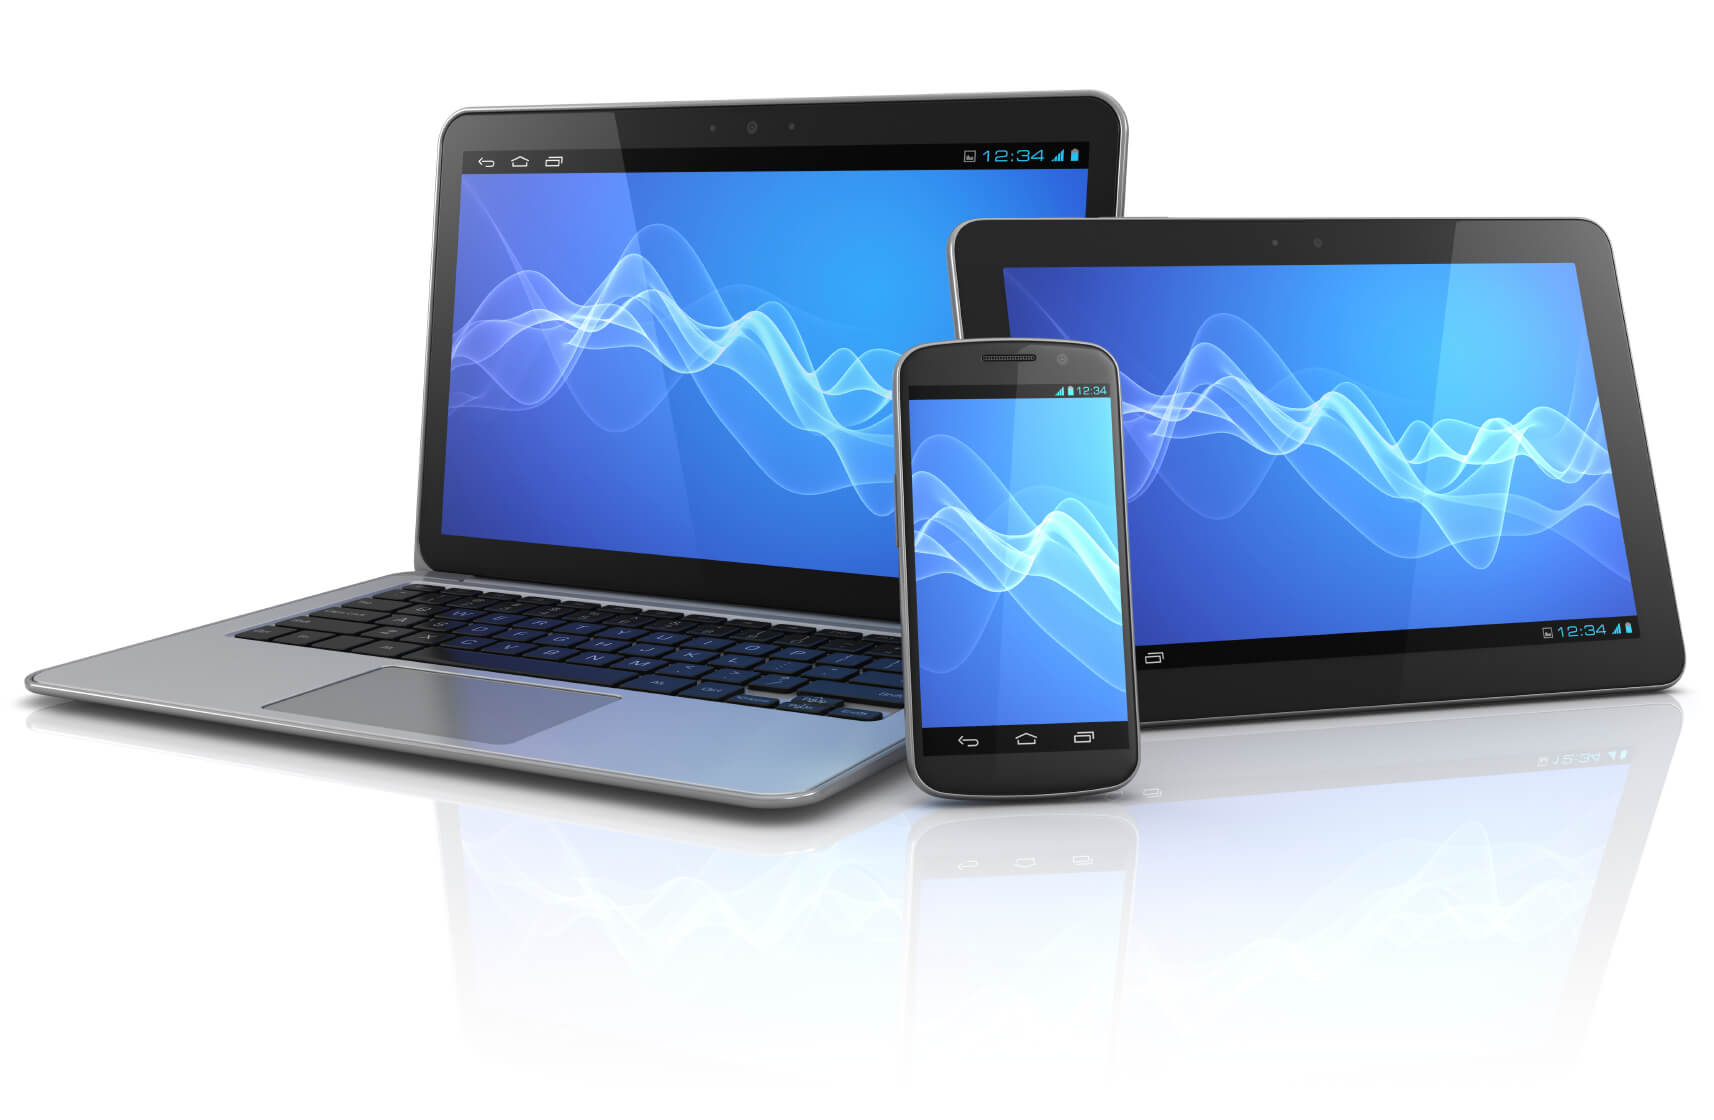 Laptop, tablet, and smartphone